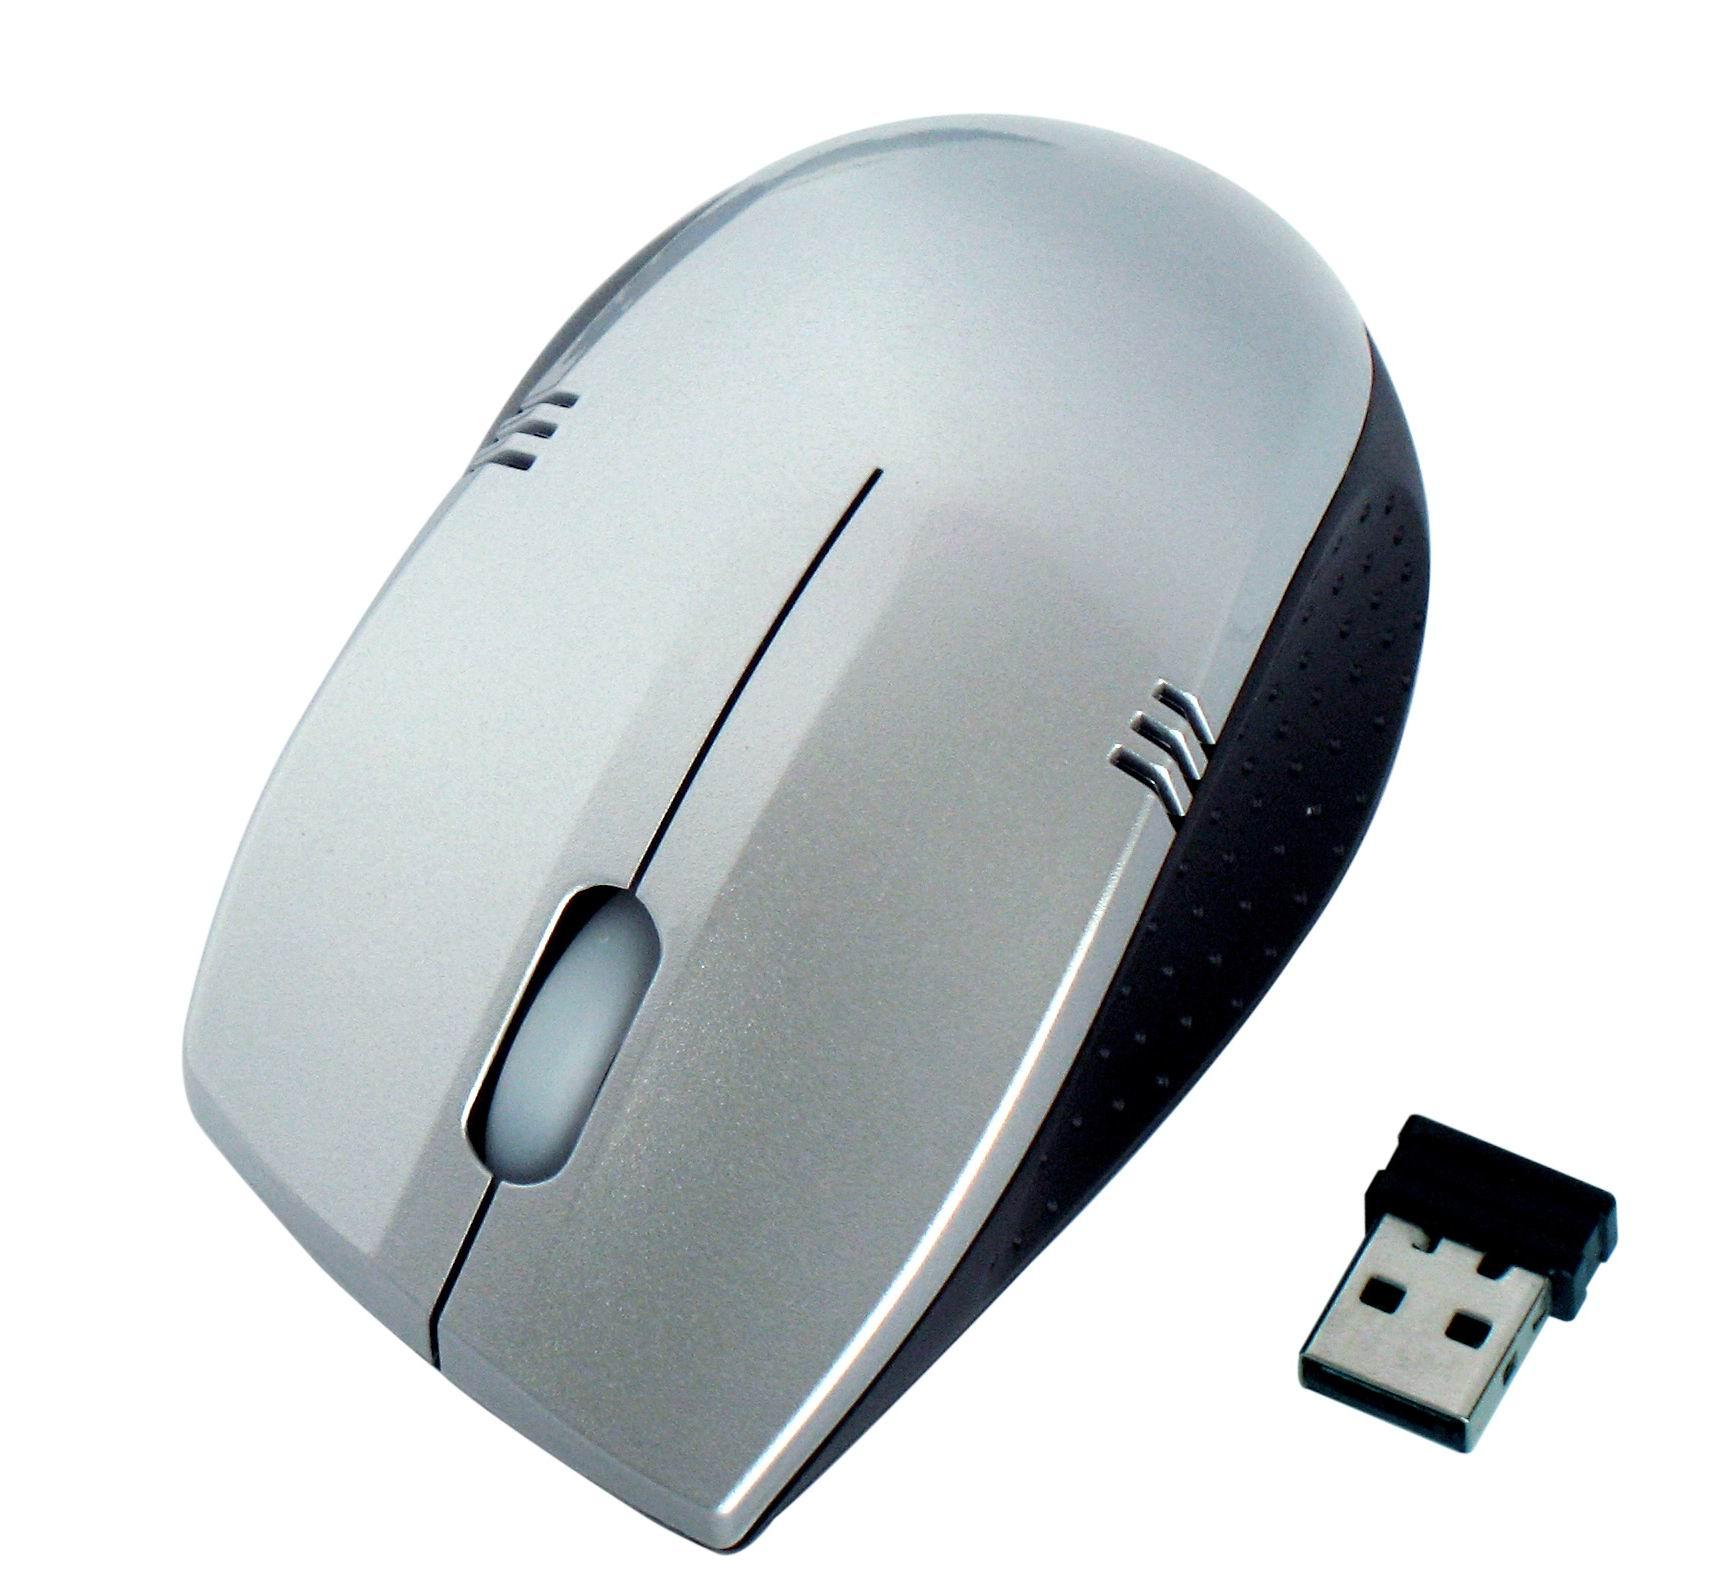 Quality Wireless Optical Mouse (JM03R) for sale